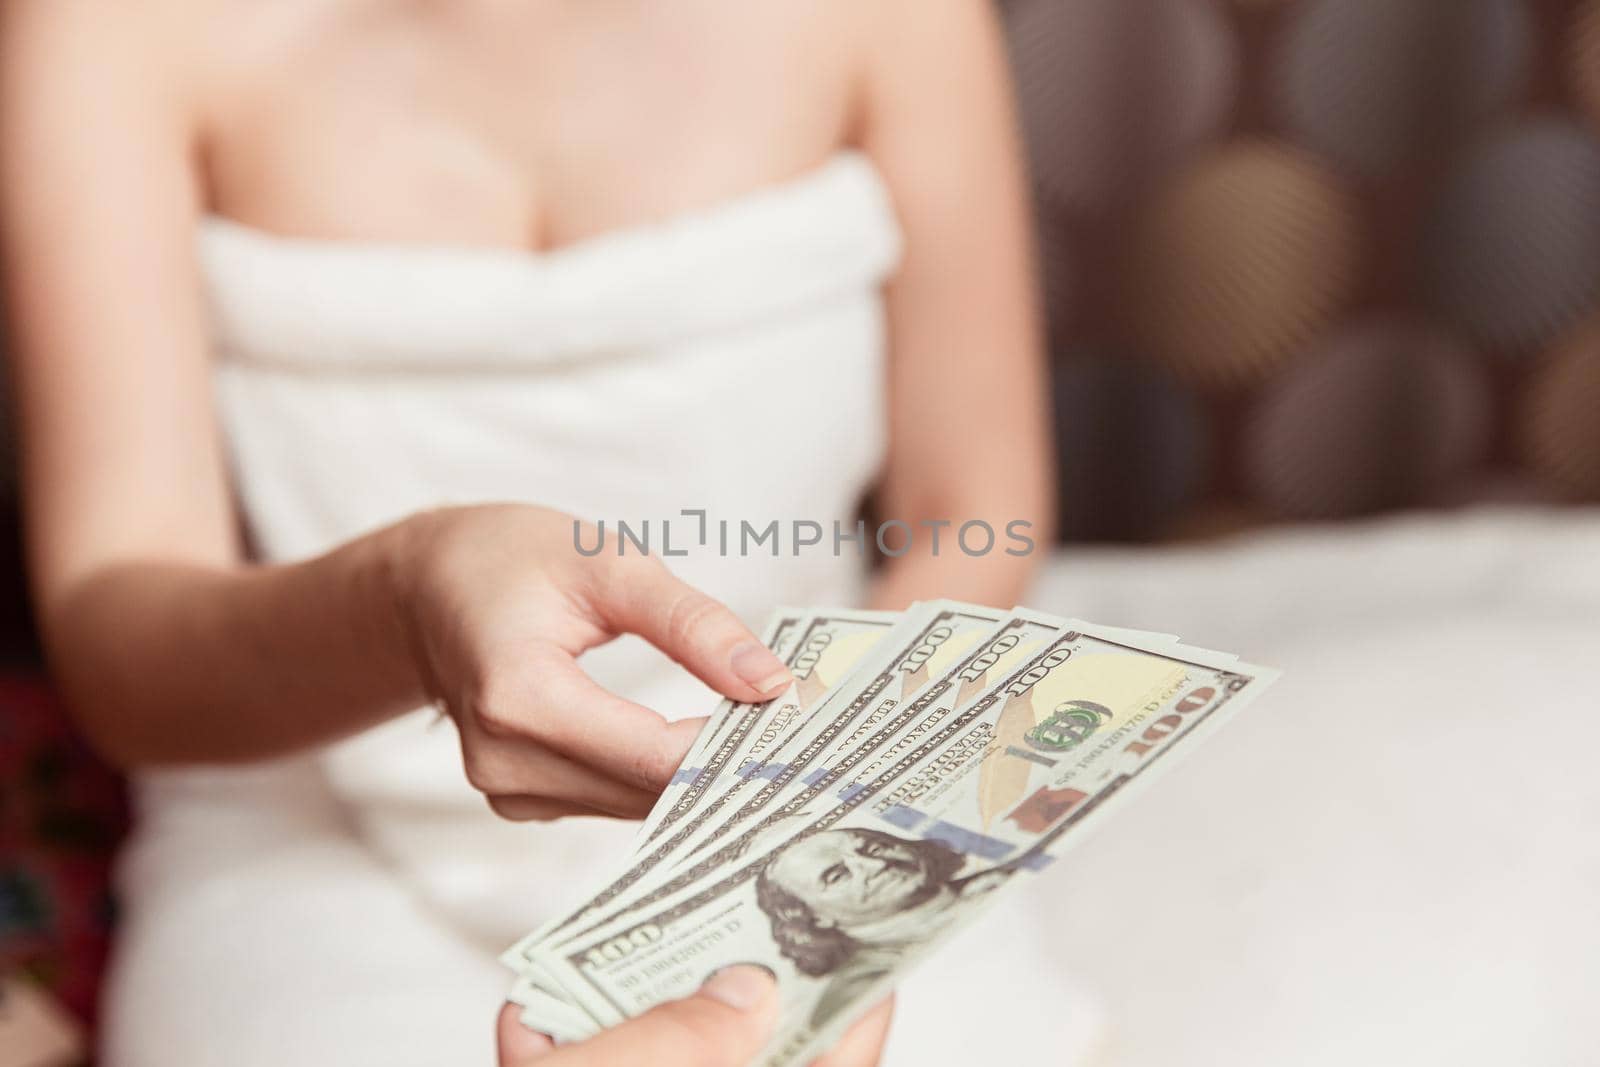 Women night worker reciving money from customer pay for personal massage service in hotel room.